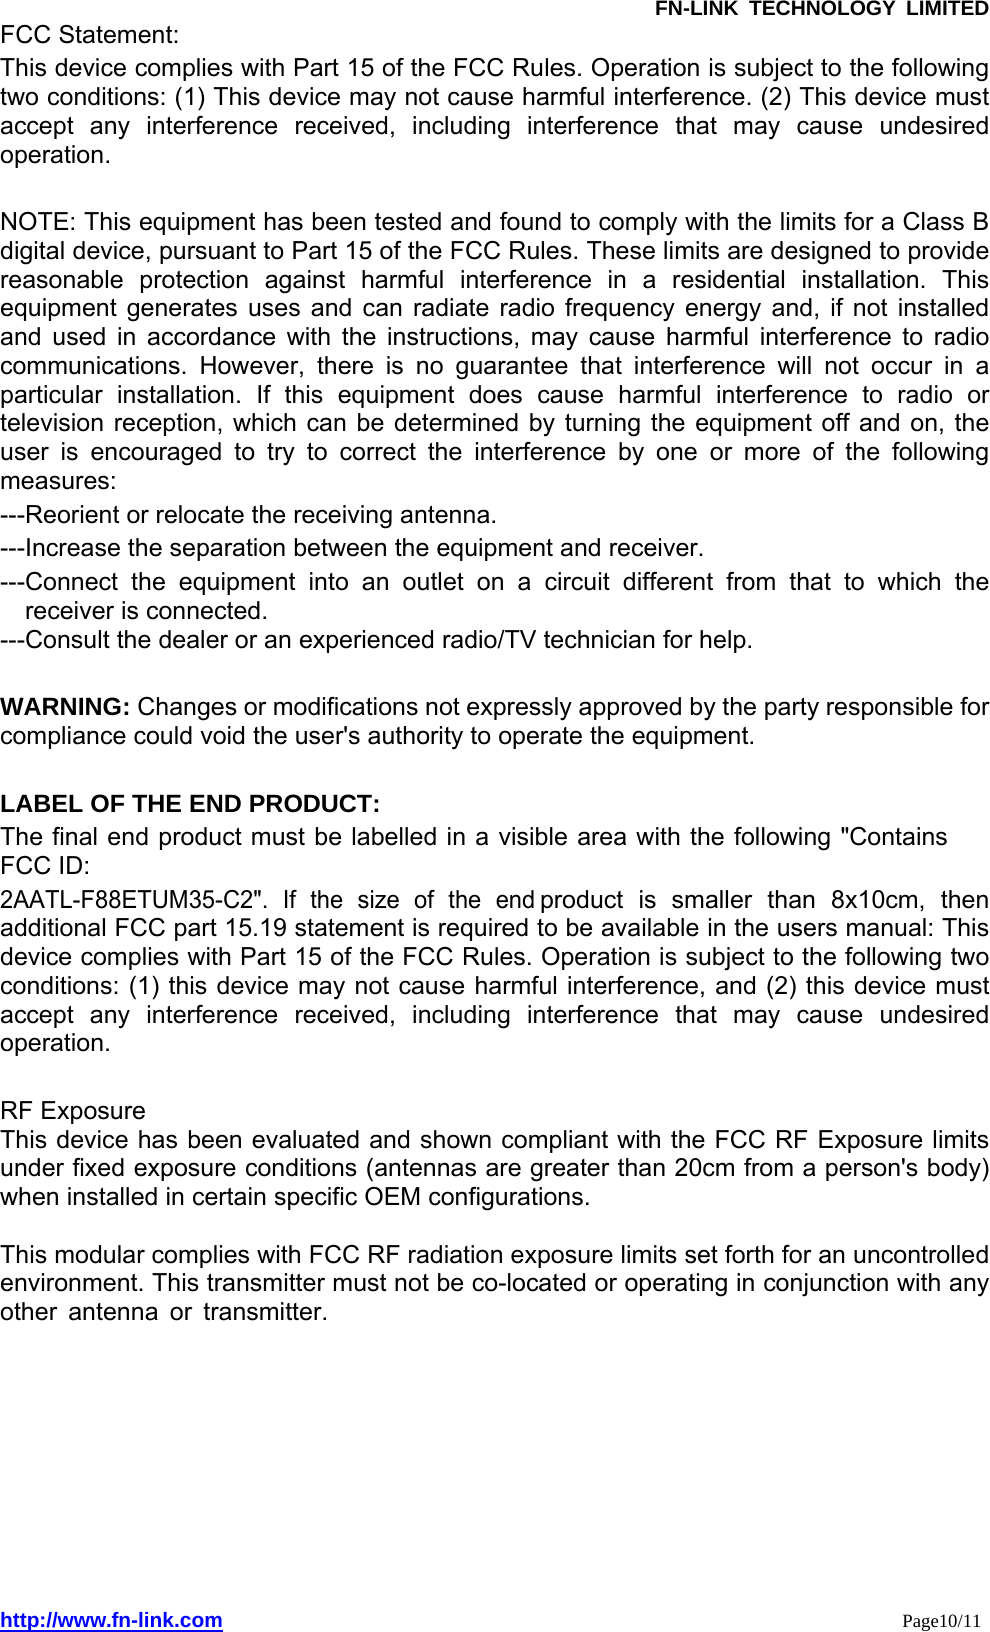               FN-LINK TECHNOLOGY LIMITED http://www.fn-link.com                                                                 Page10/11FCC Statement: This device complies with Part 15 of the FCC Rules. Operation is subject to the following two conditions: (1) This device may not cause harmful interference. (2) This device must accept any interference received, including interference that may cause undesired operation.   NOTE: This equipment has been tested and found to comply with the limits for a Class B digital device, pursuant to Part 15 of the FCC Rules. These limits are designed to provide reasonable protection against harmful interference in a residential installation. This equipment generates uses and can radiate radio frequency energy and, if not installed and used in accordance with the instructions, may cause harmful interference to radio communications. However, there is no guarantee that interference will not occur in a particular installation. If this equipment does cause harmful interference to radio or television reception, which can be determined by turning the equipment off and on, the user is encouraged to try to correct the interference by one or more of the following measures:  ---Reorient or relocate the receiving antenna. ---Increase the separation between the equipment and receiver.     ---Connect the equipment into an outlet on a circuit different from that to which the receiver is connected. ---Consult the dealer or an experienced radio/TV technician for help.  WARNING: Changes or modifications not expressly approved by the party responsible for compliance could void the user&apos;s authority to operate the equipment.    LABEL OF THE END PRODUCT: The final end product must be labelled in a visible area with the following &quot;Contains  FCC ID: 2AATL-F88ETUM35-C2&quot;. If the size of the end product is smaller than 8x10cm, then additional FCC part 15.19 statement is required to be available in the users manual: This device complies with Part 15 of the FCC Rules. Operation is subject to the following two conditions: (1) this device may not cause harmful interference, and (2) this device must accept any interference received, including interference that may cause undesired operation.  RF Exposure This device has been evaluated and shown compliant with the FCC RF Exposure limits under fixed exposure conditions (antennas are greater than 20cm from a person&apos;s body) when installed in certain specific OEM configurations.  This modular complies with FCC RF radiation exposure limits set forth for an uncontrolled environment. This transmitter must not be co-located or operating in conjunction with any other antenna or transmitter.    